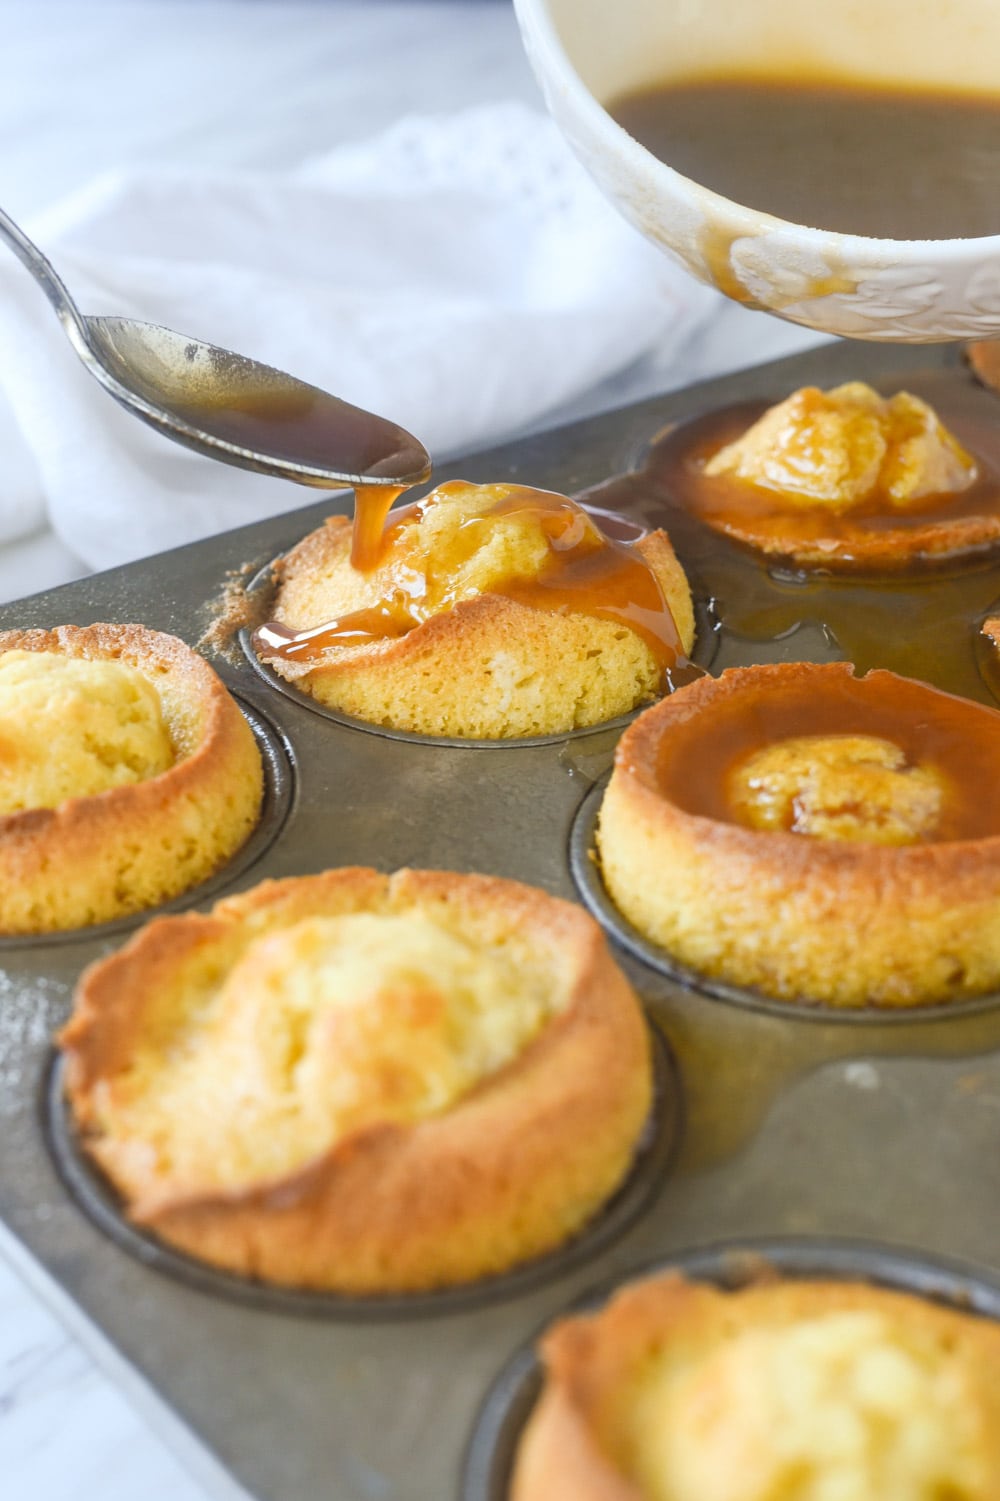 spooning glaze over marmalade muffins